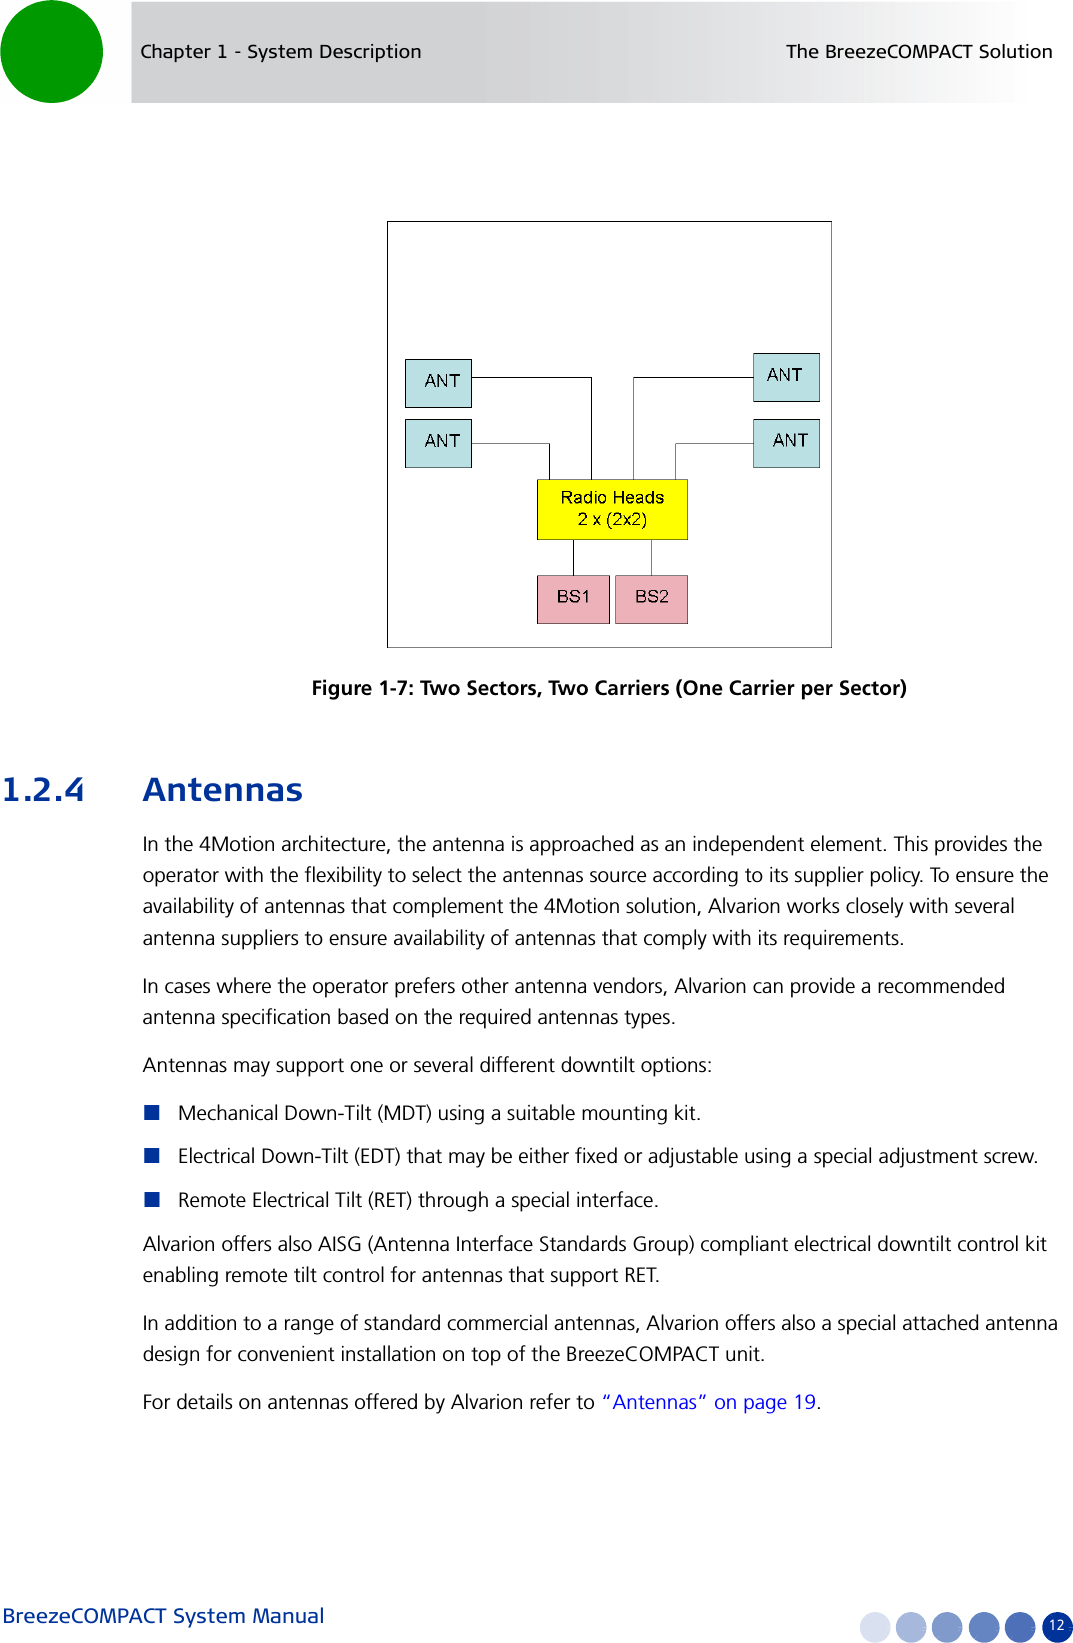 BreezeCOMPACT System Manual 12Chapter 1 - System Description The BreezeCOMPACT Solution1.2.4 AntennasIn the 4Motion architecture, the antenna is approached as an independent element. This provides the operator with the flexibility to select the antennas source according to its supplier policy. To ensure the availability of antennas that complement the 4Motion solution, Alvarion works closely with several antenna suppliers to ensure availability of antennas that comply with its requirements.In cases where the operator prefers other antenna vendors, Alvarion can provide a recommended antenna specification based on the required antennas types.Antennas may support one or several different downtilt options:Mechanical Down-Tilt (MDT) using a suitable mounting kit.Electrical Down-Tilt (EDT) that may be either fixed or adjustable using a special adjustment screw.Remote Electrical Tilt (RET) through a special interface.Alvarion offers also AISG (Antenna Interface Standards Group) compliant electrical downtilt control kit enabling remote tilt control for antennas that support RET.In addition to a range of standard commercial antennas, Alvarion offers also a special attached antenna design for convenient installation on top of the BreezeCOMPACT unit.For details on antennas offered by Alvarion refer to “Antennas” on page 19.Figure 1-7: Two Sectors, Two Carriers (One Carrier per Sector)